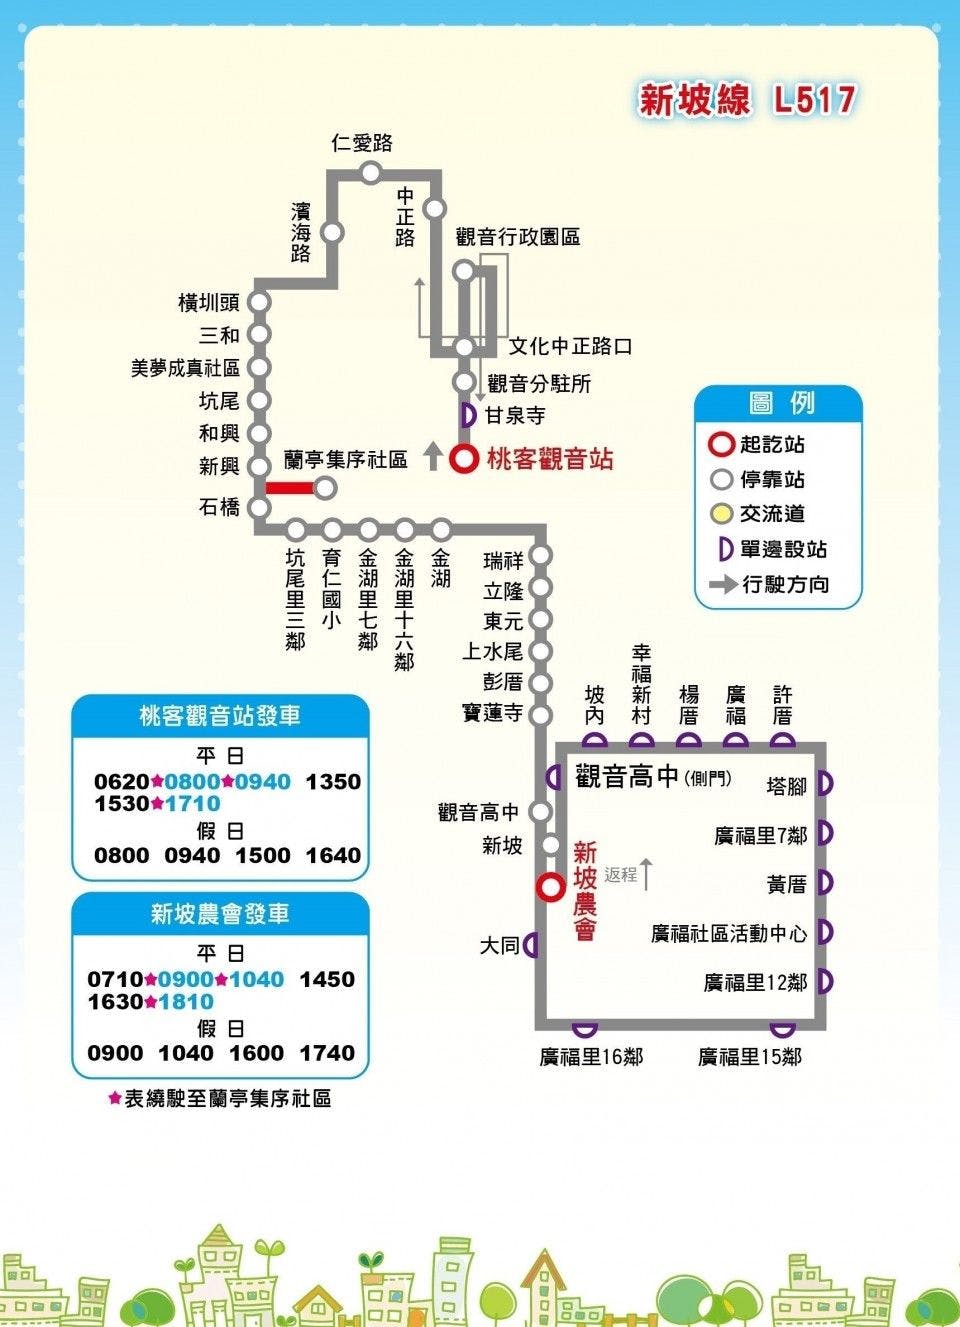 L517Route Map-桃園 Bus